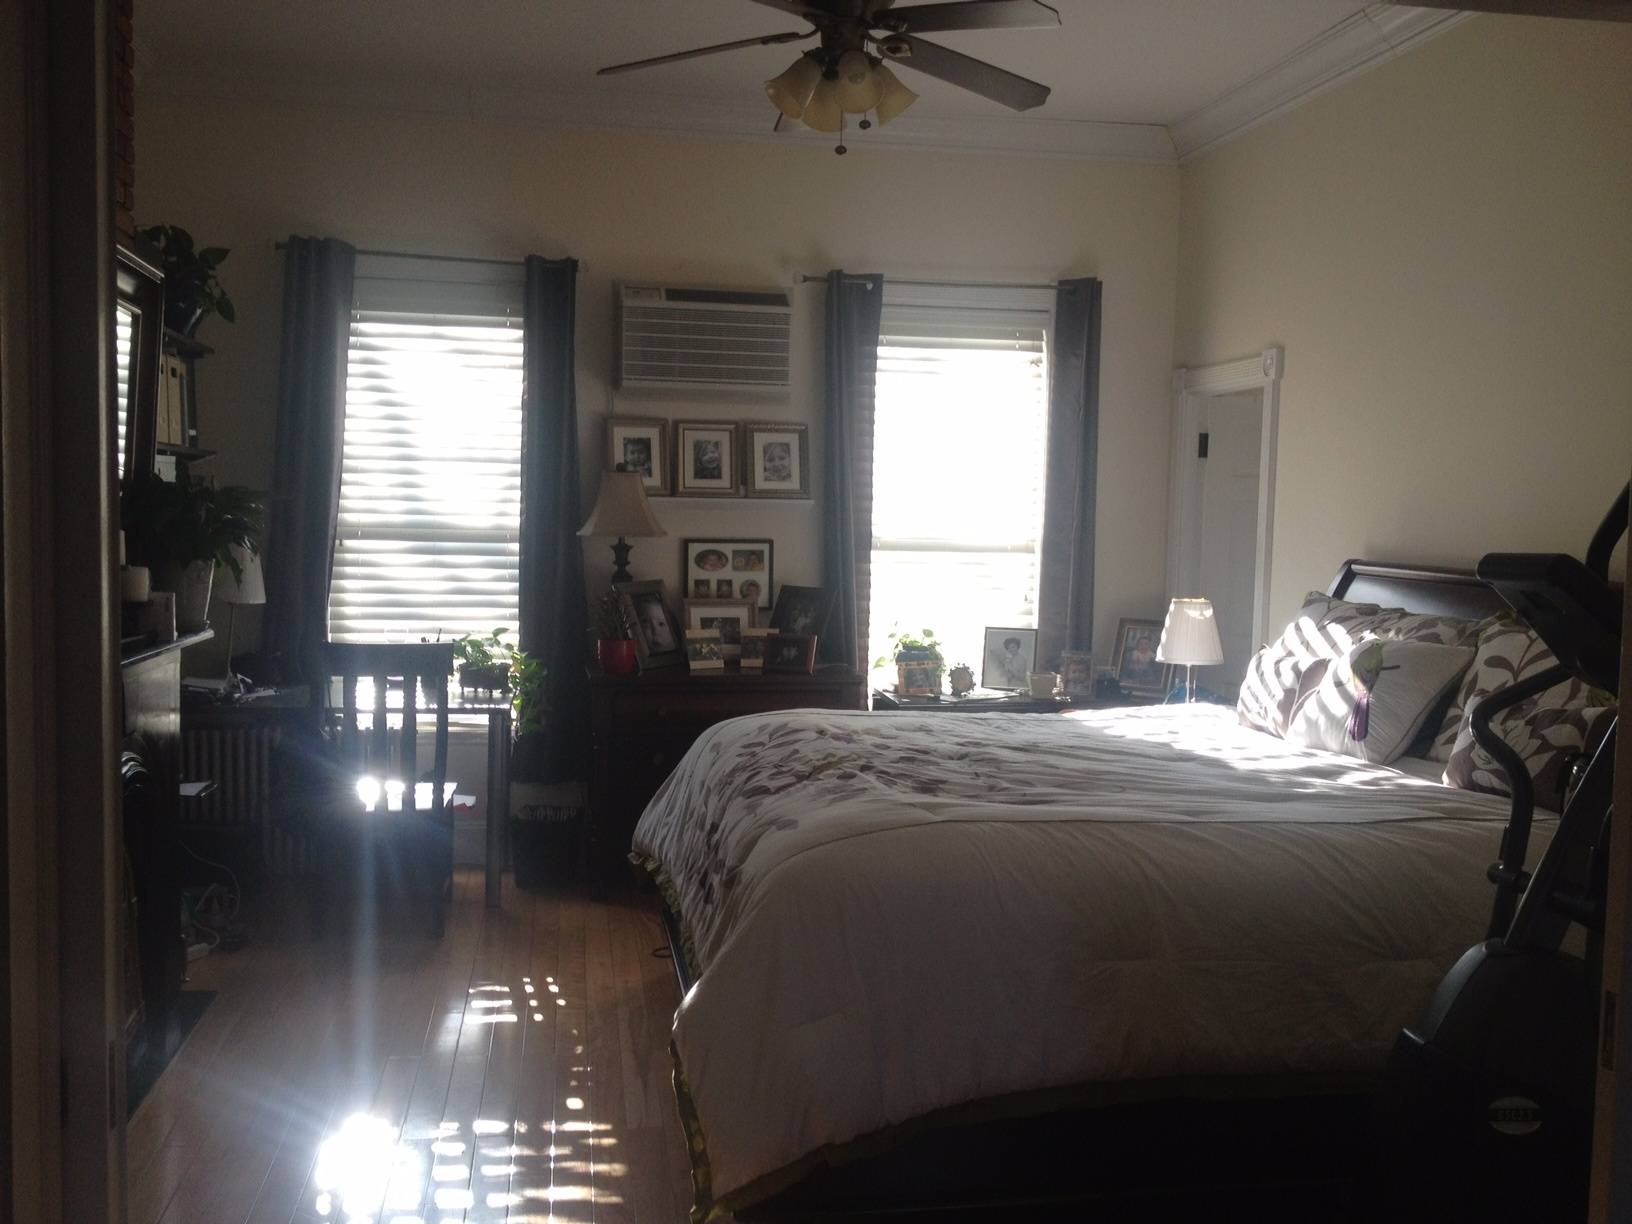 FULLY FURNISHED Greenpoint Brooklyn CONVERTIBLE 3BR Plus Attic & PRIVATE OUTDOOR SPACE! A MUST SEE!!!